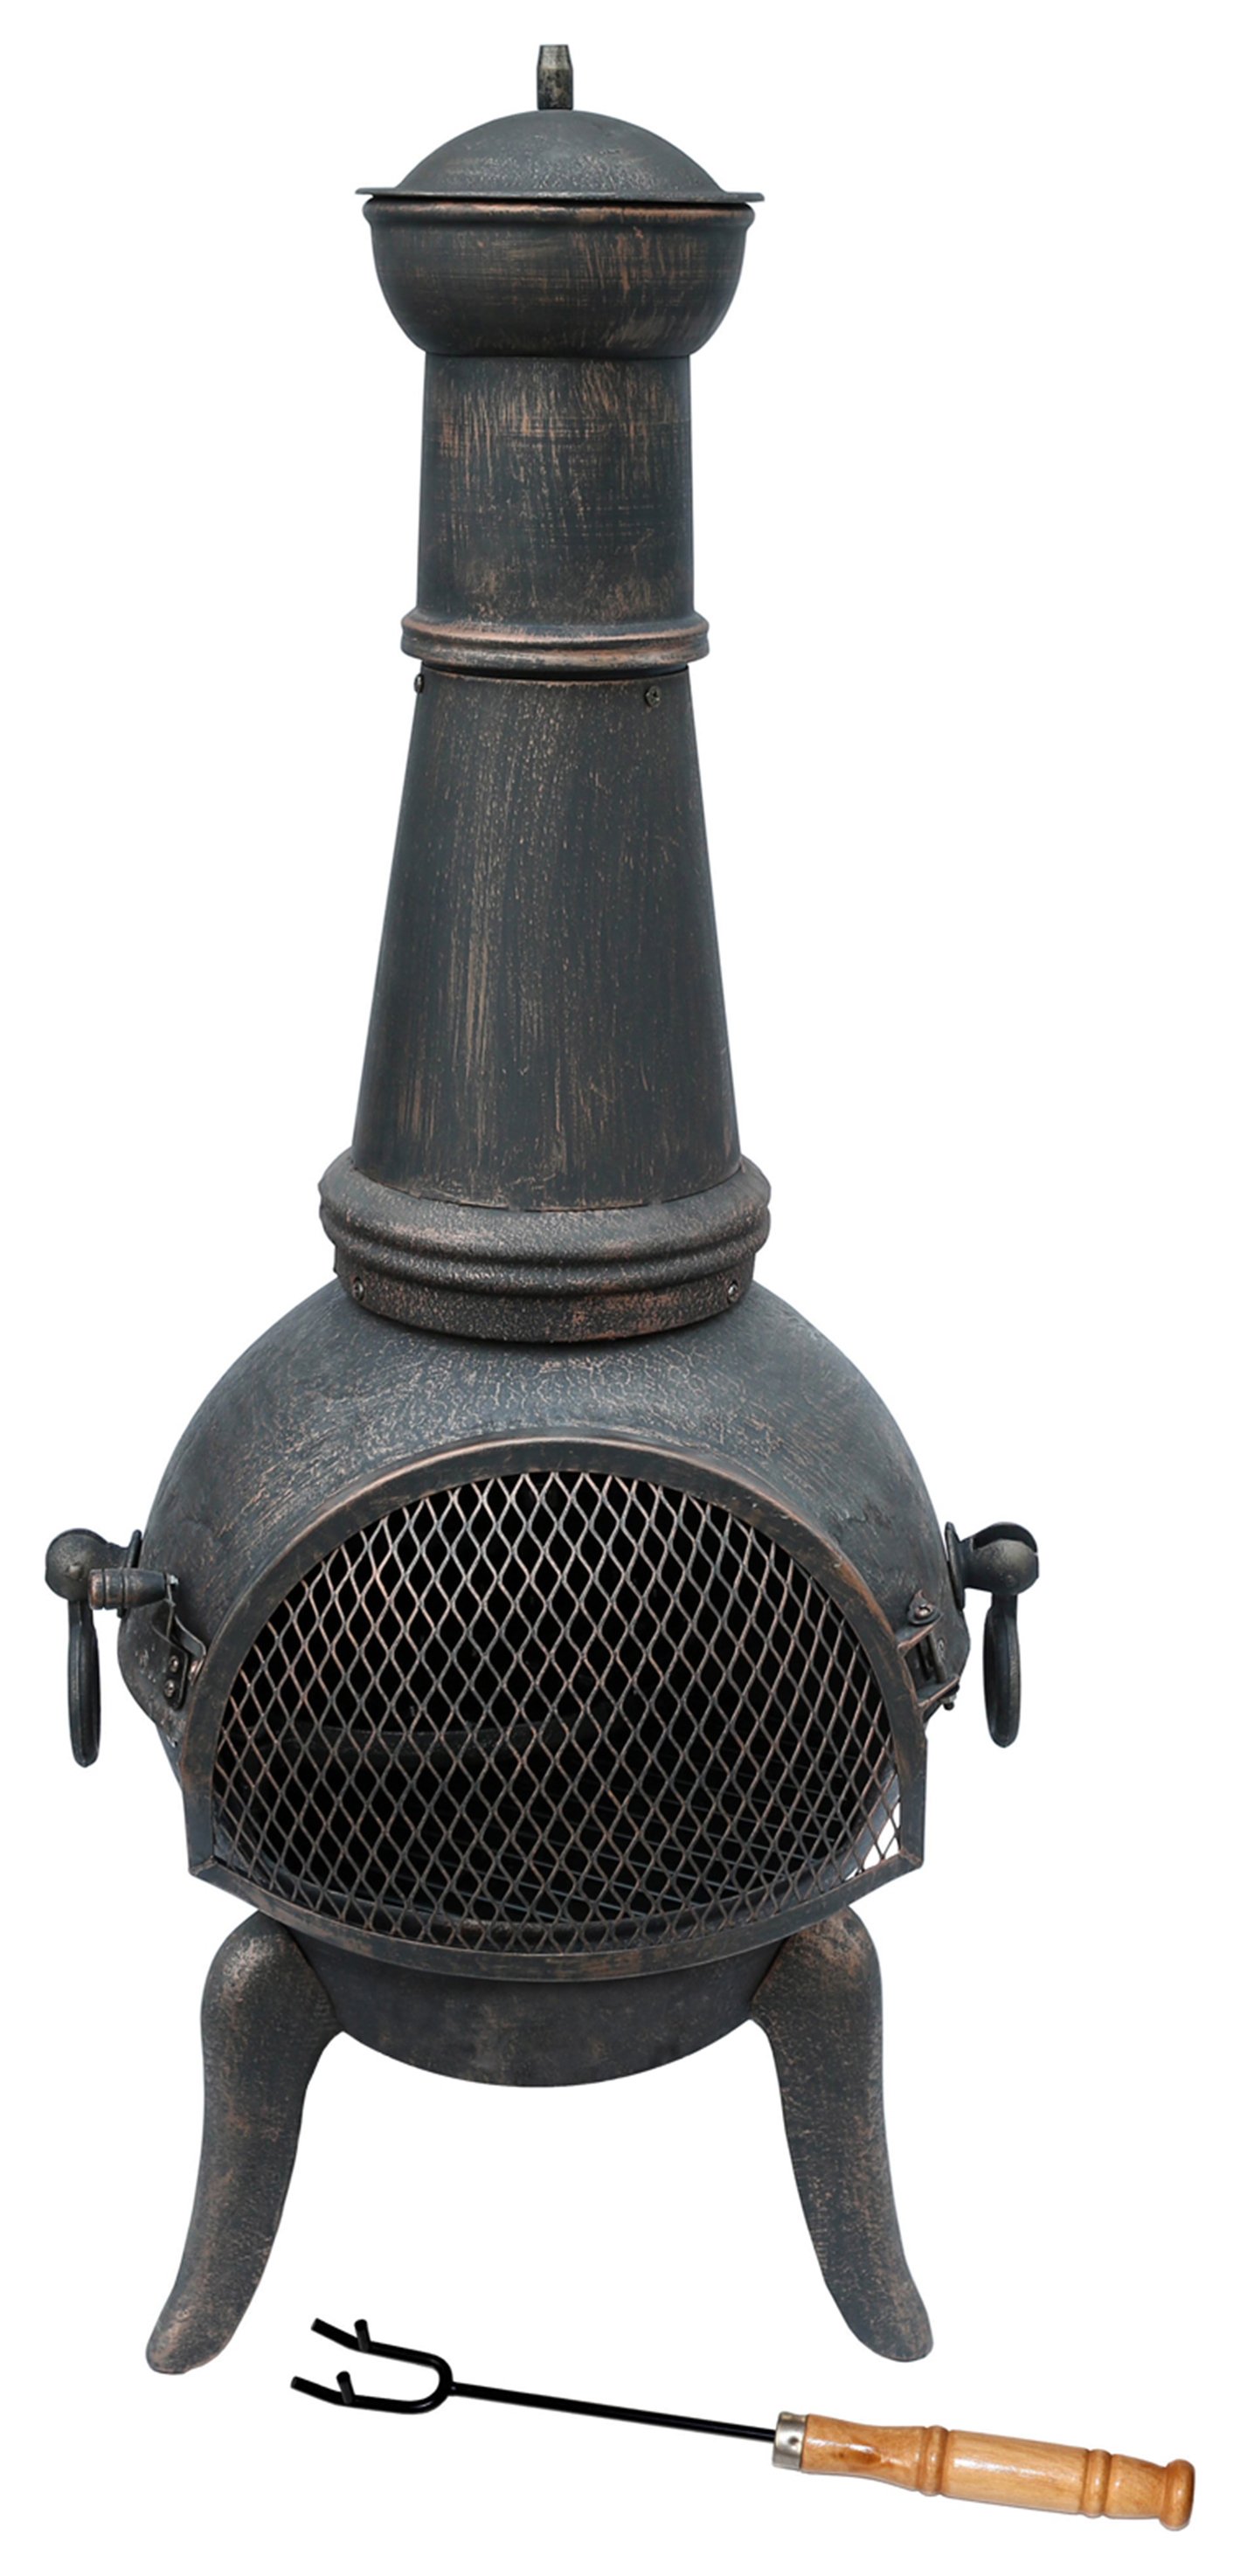 Charles Bentley 124cm Extra Large Cast Iron & Steel Outdoor Chiminea - Black